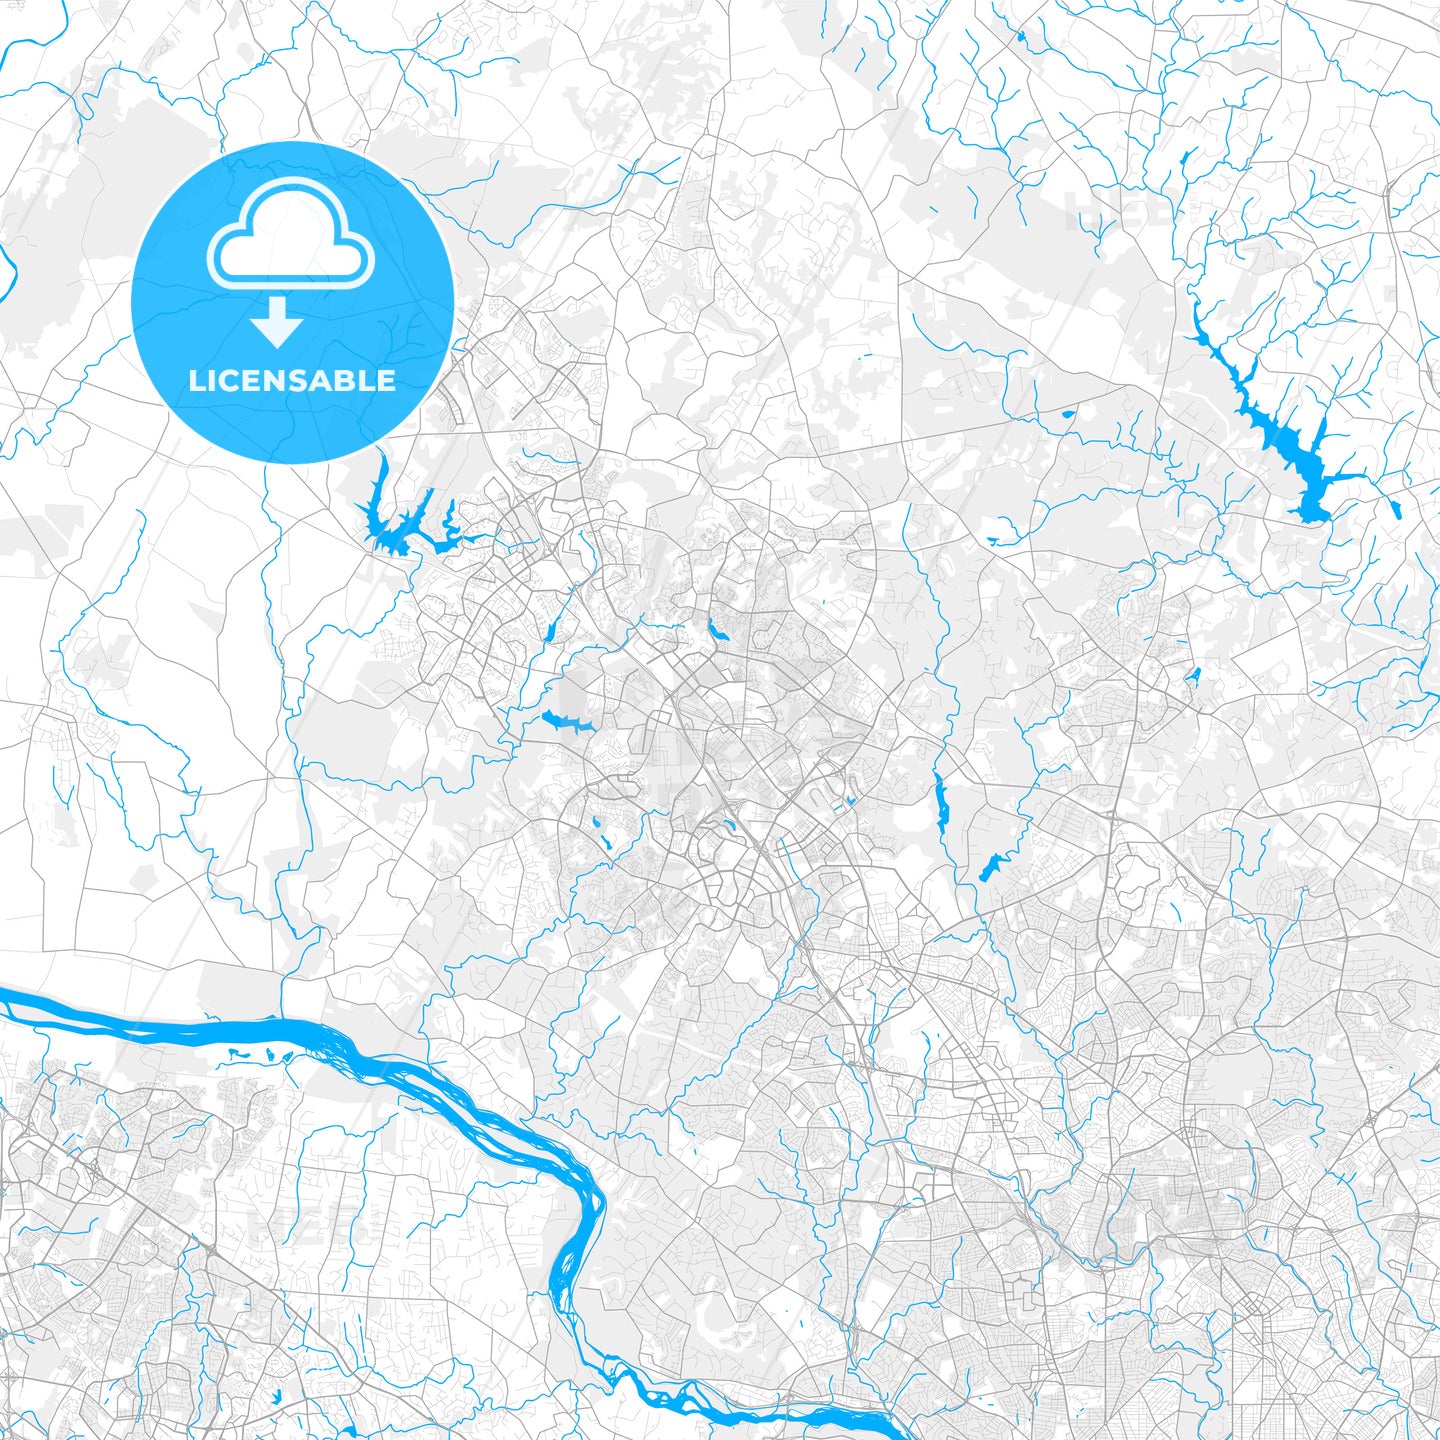 Rich detailed vector map of Gaithersburg, Maryland, USA